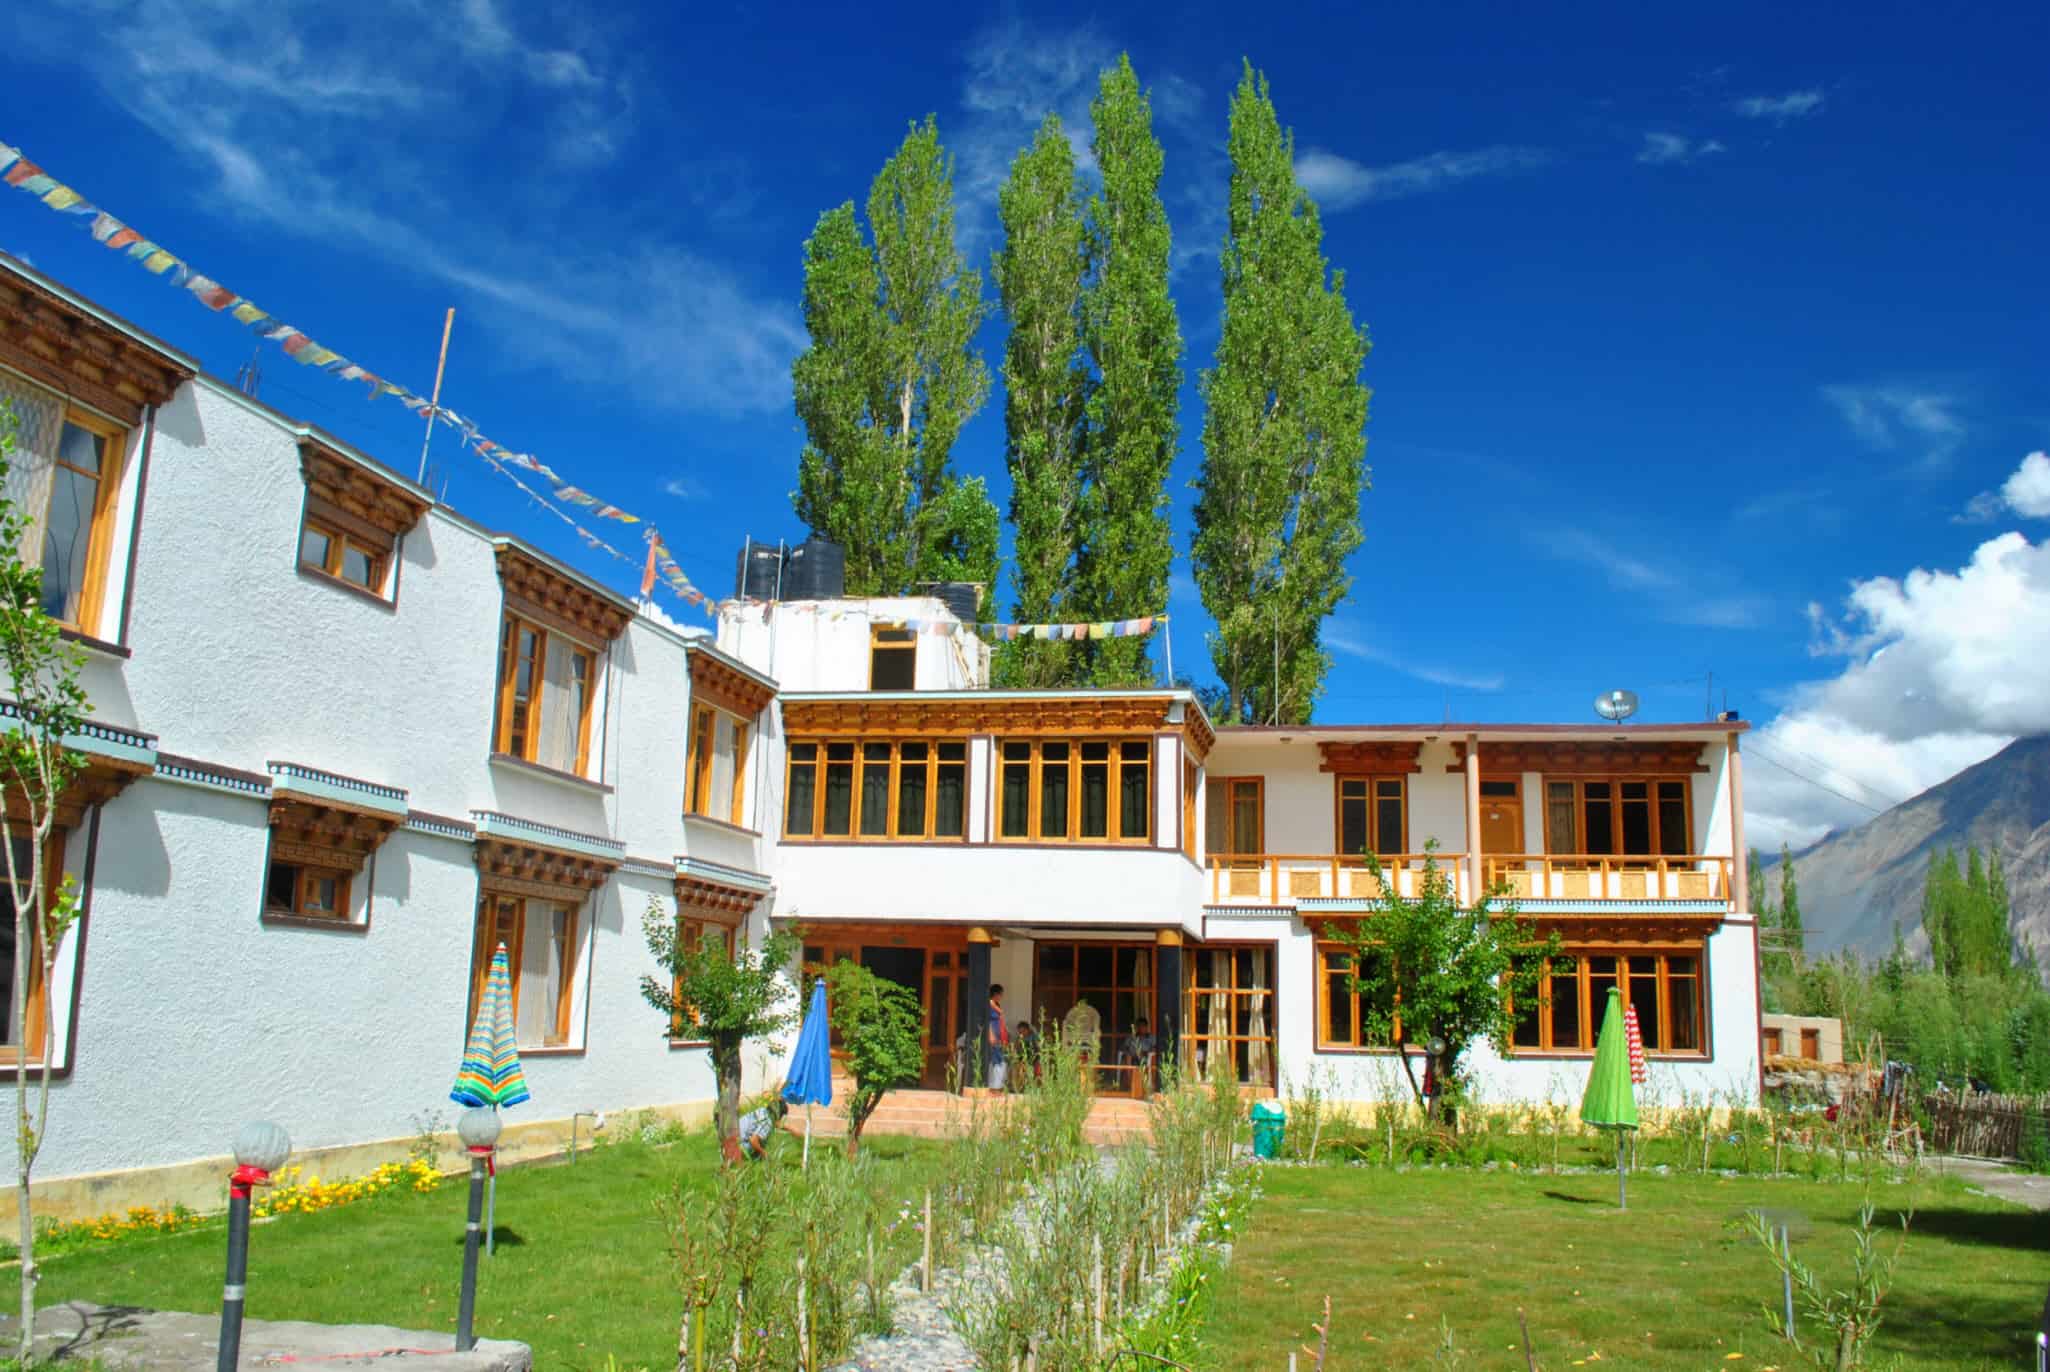 Beautiful place to stay in Nubra Valley